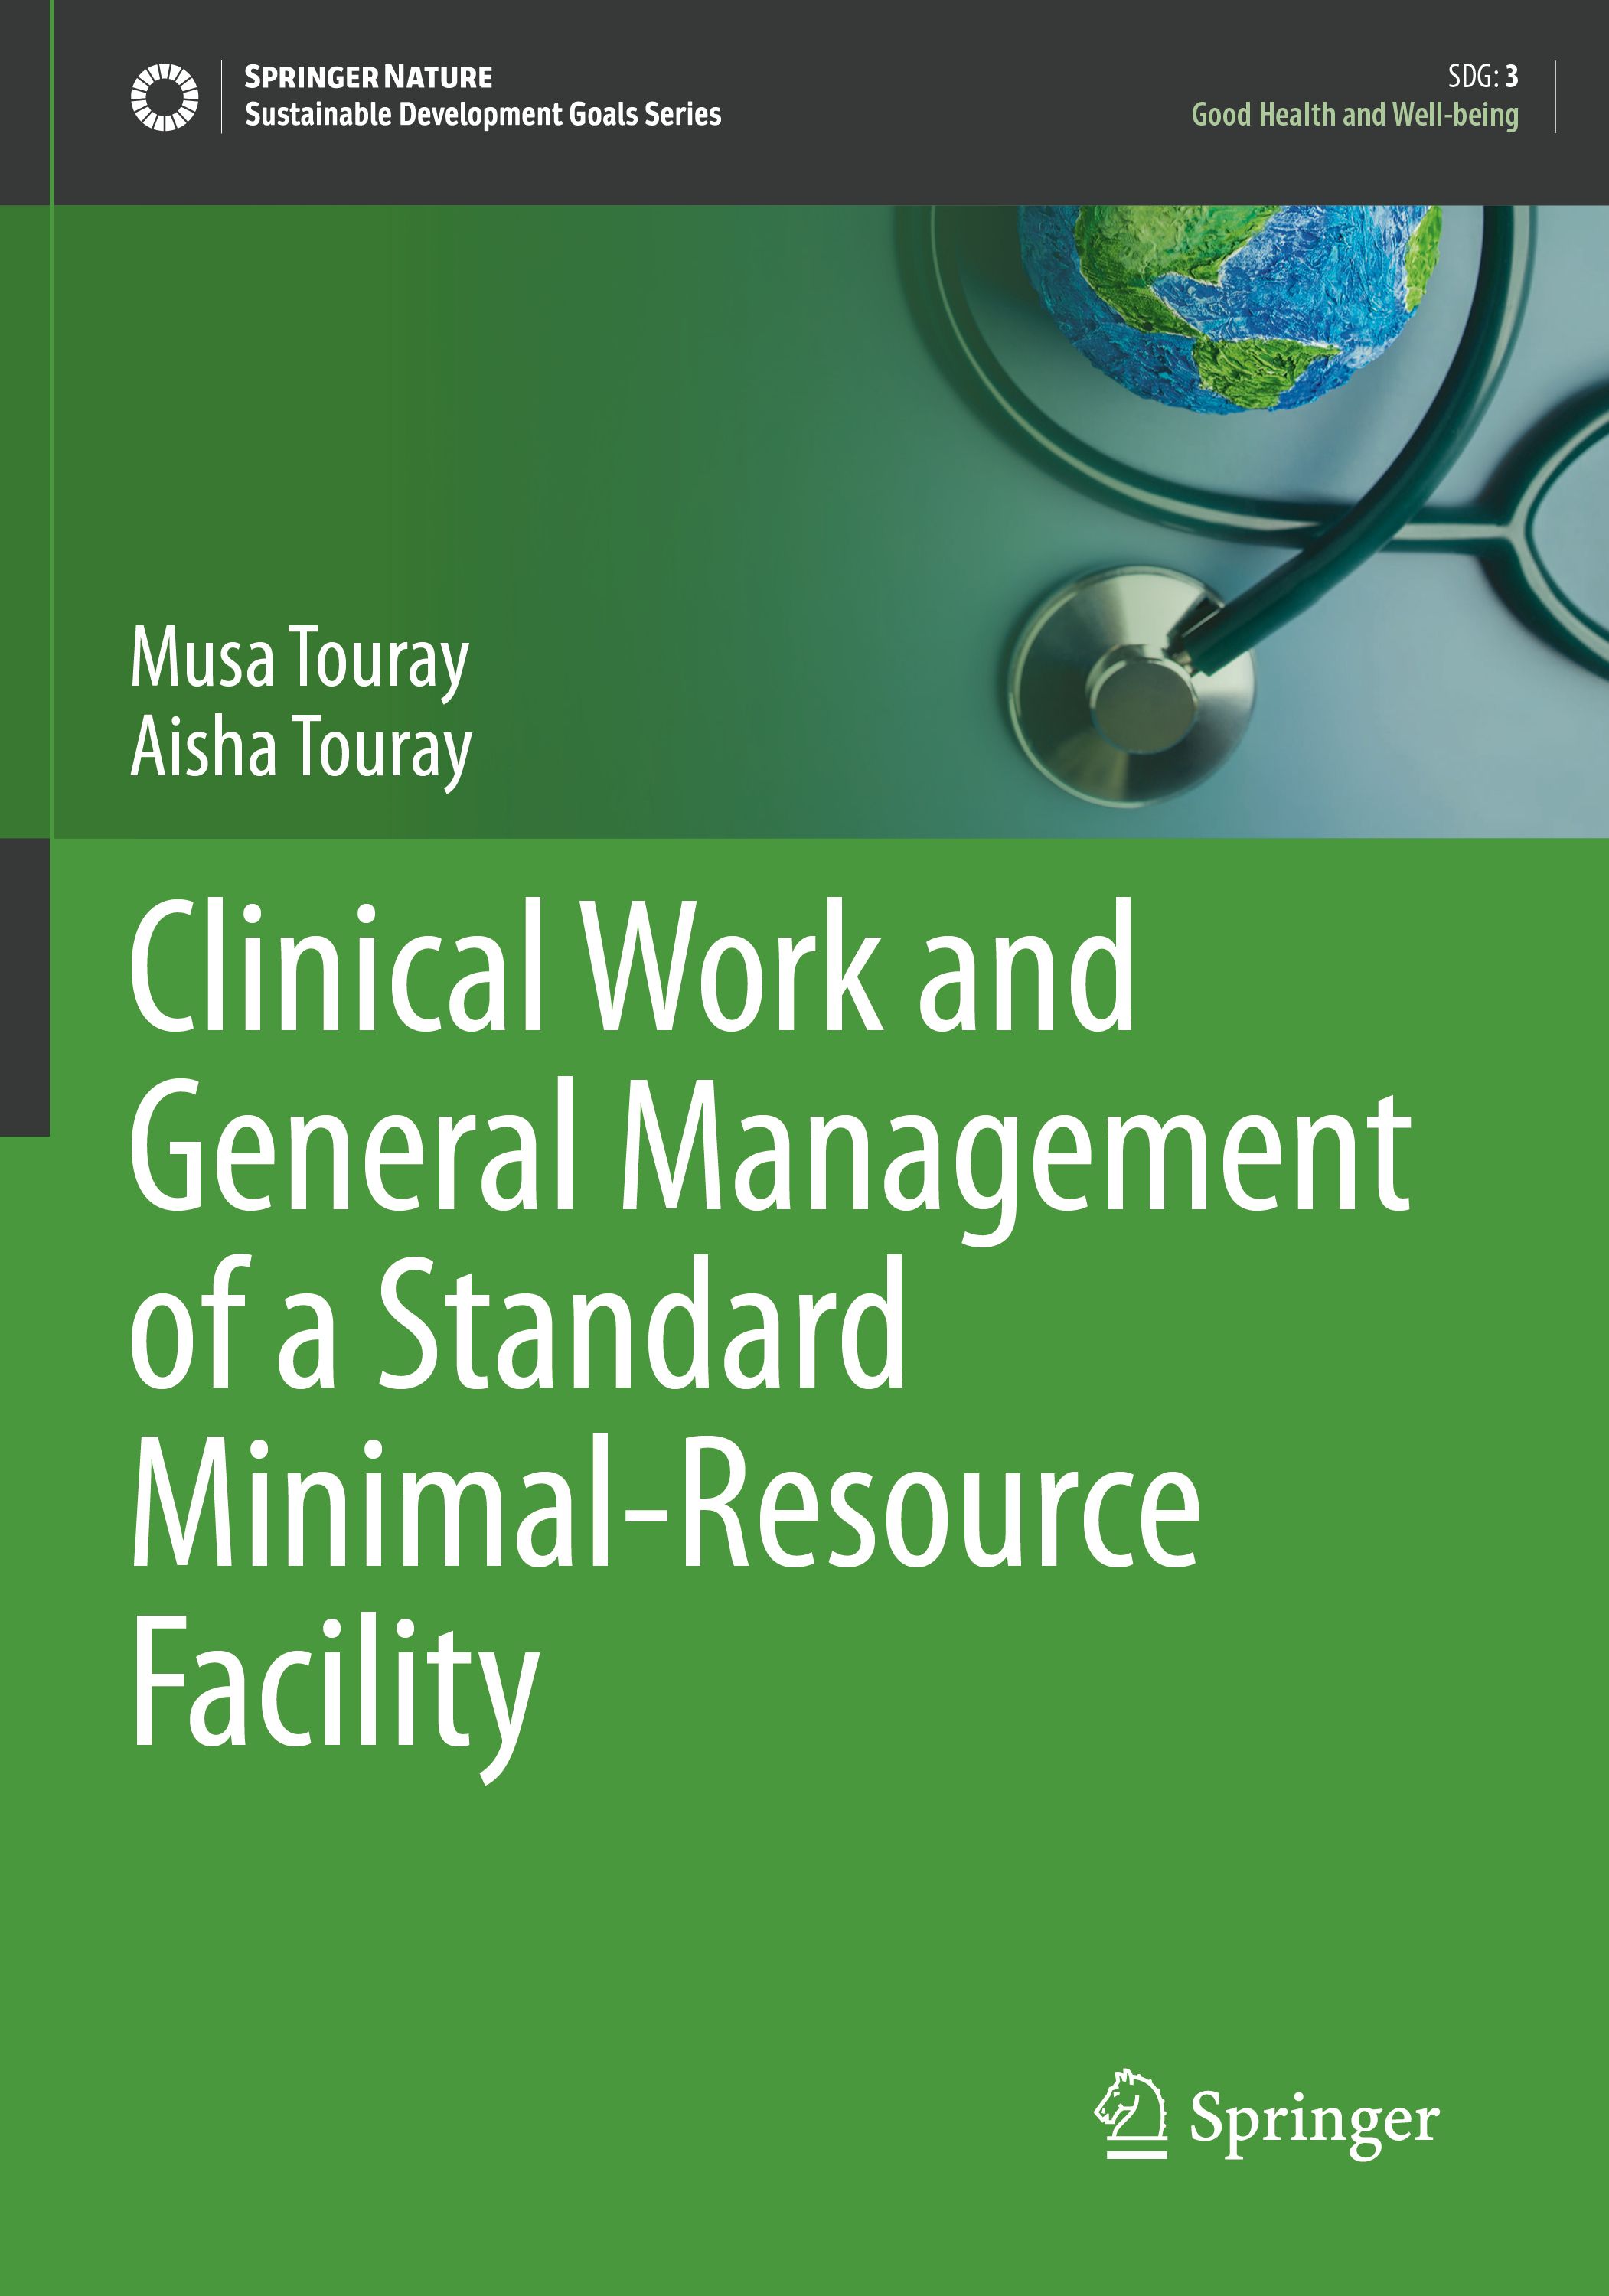 Clinical Work and General Management of a Standard Minimal-Resource Facility